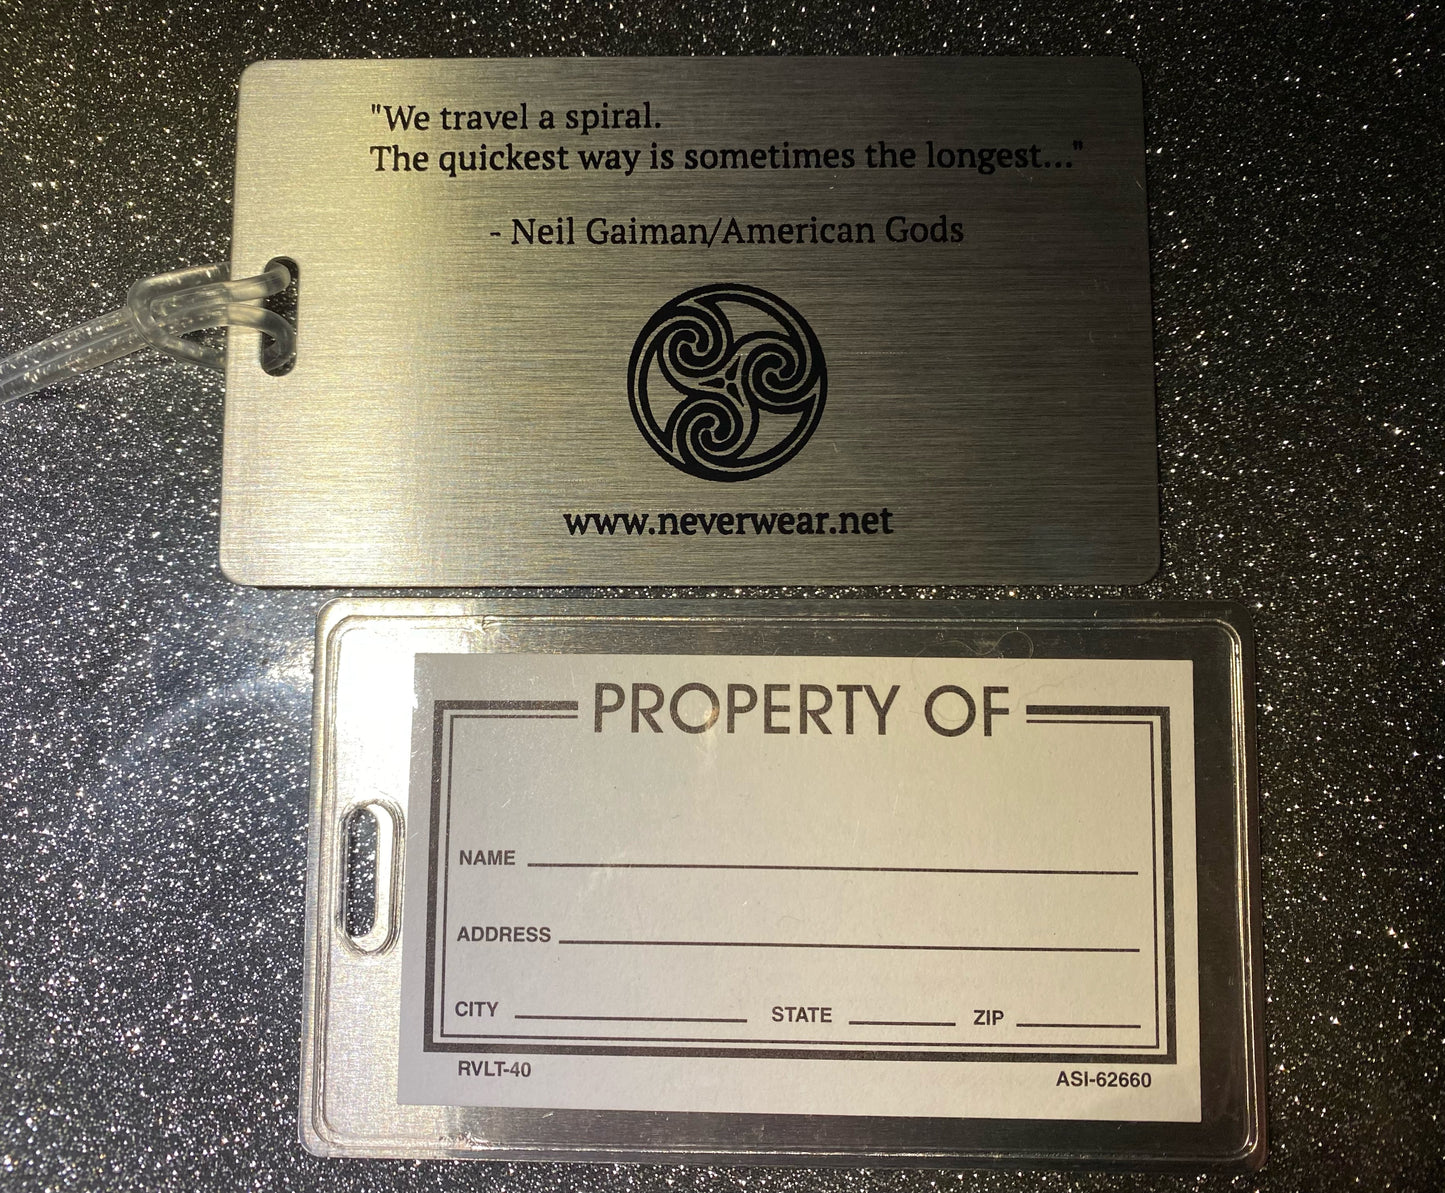 Attention travellers! Metal luggage tag w/Neil quote